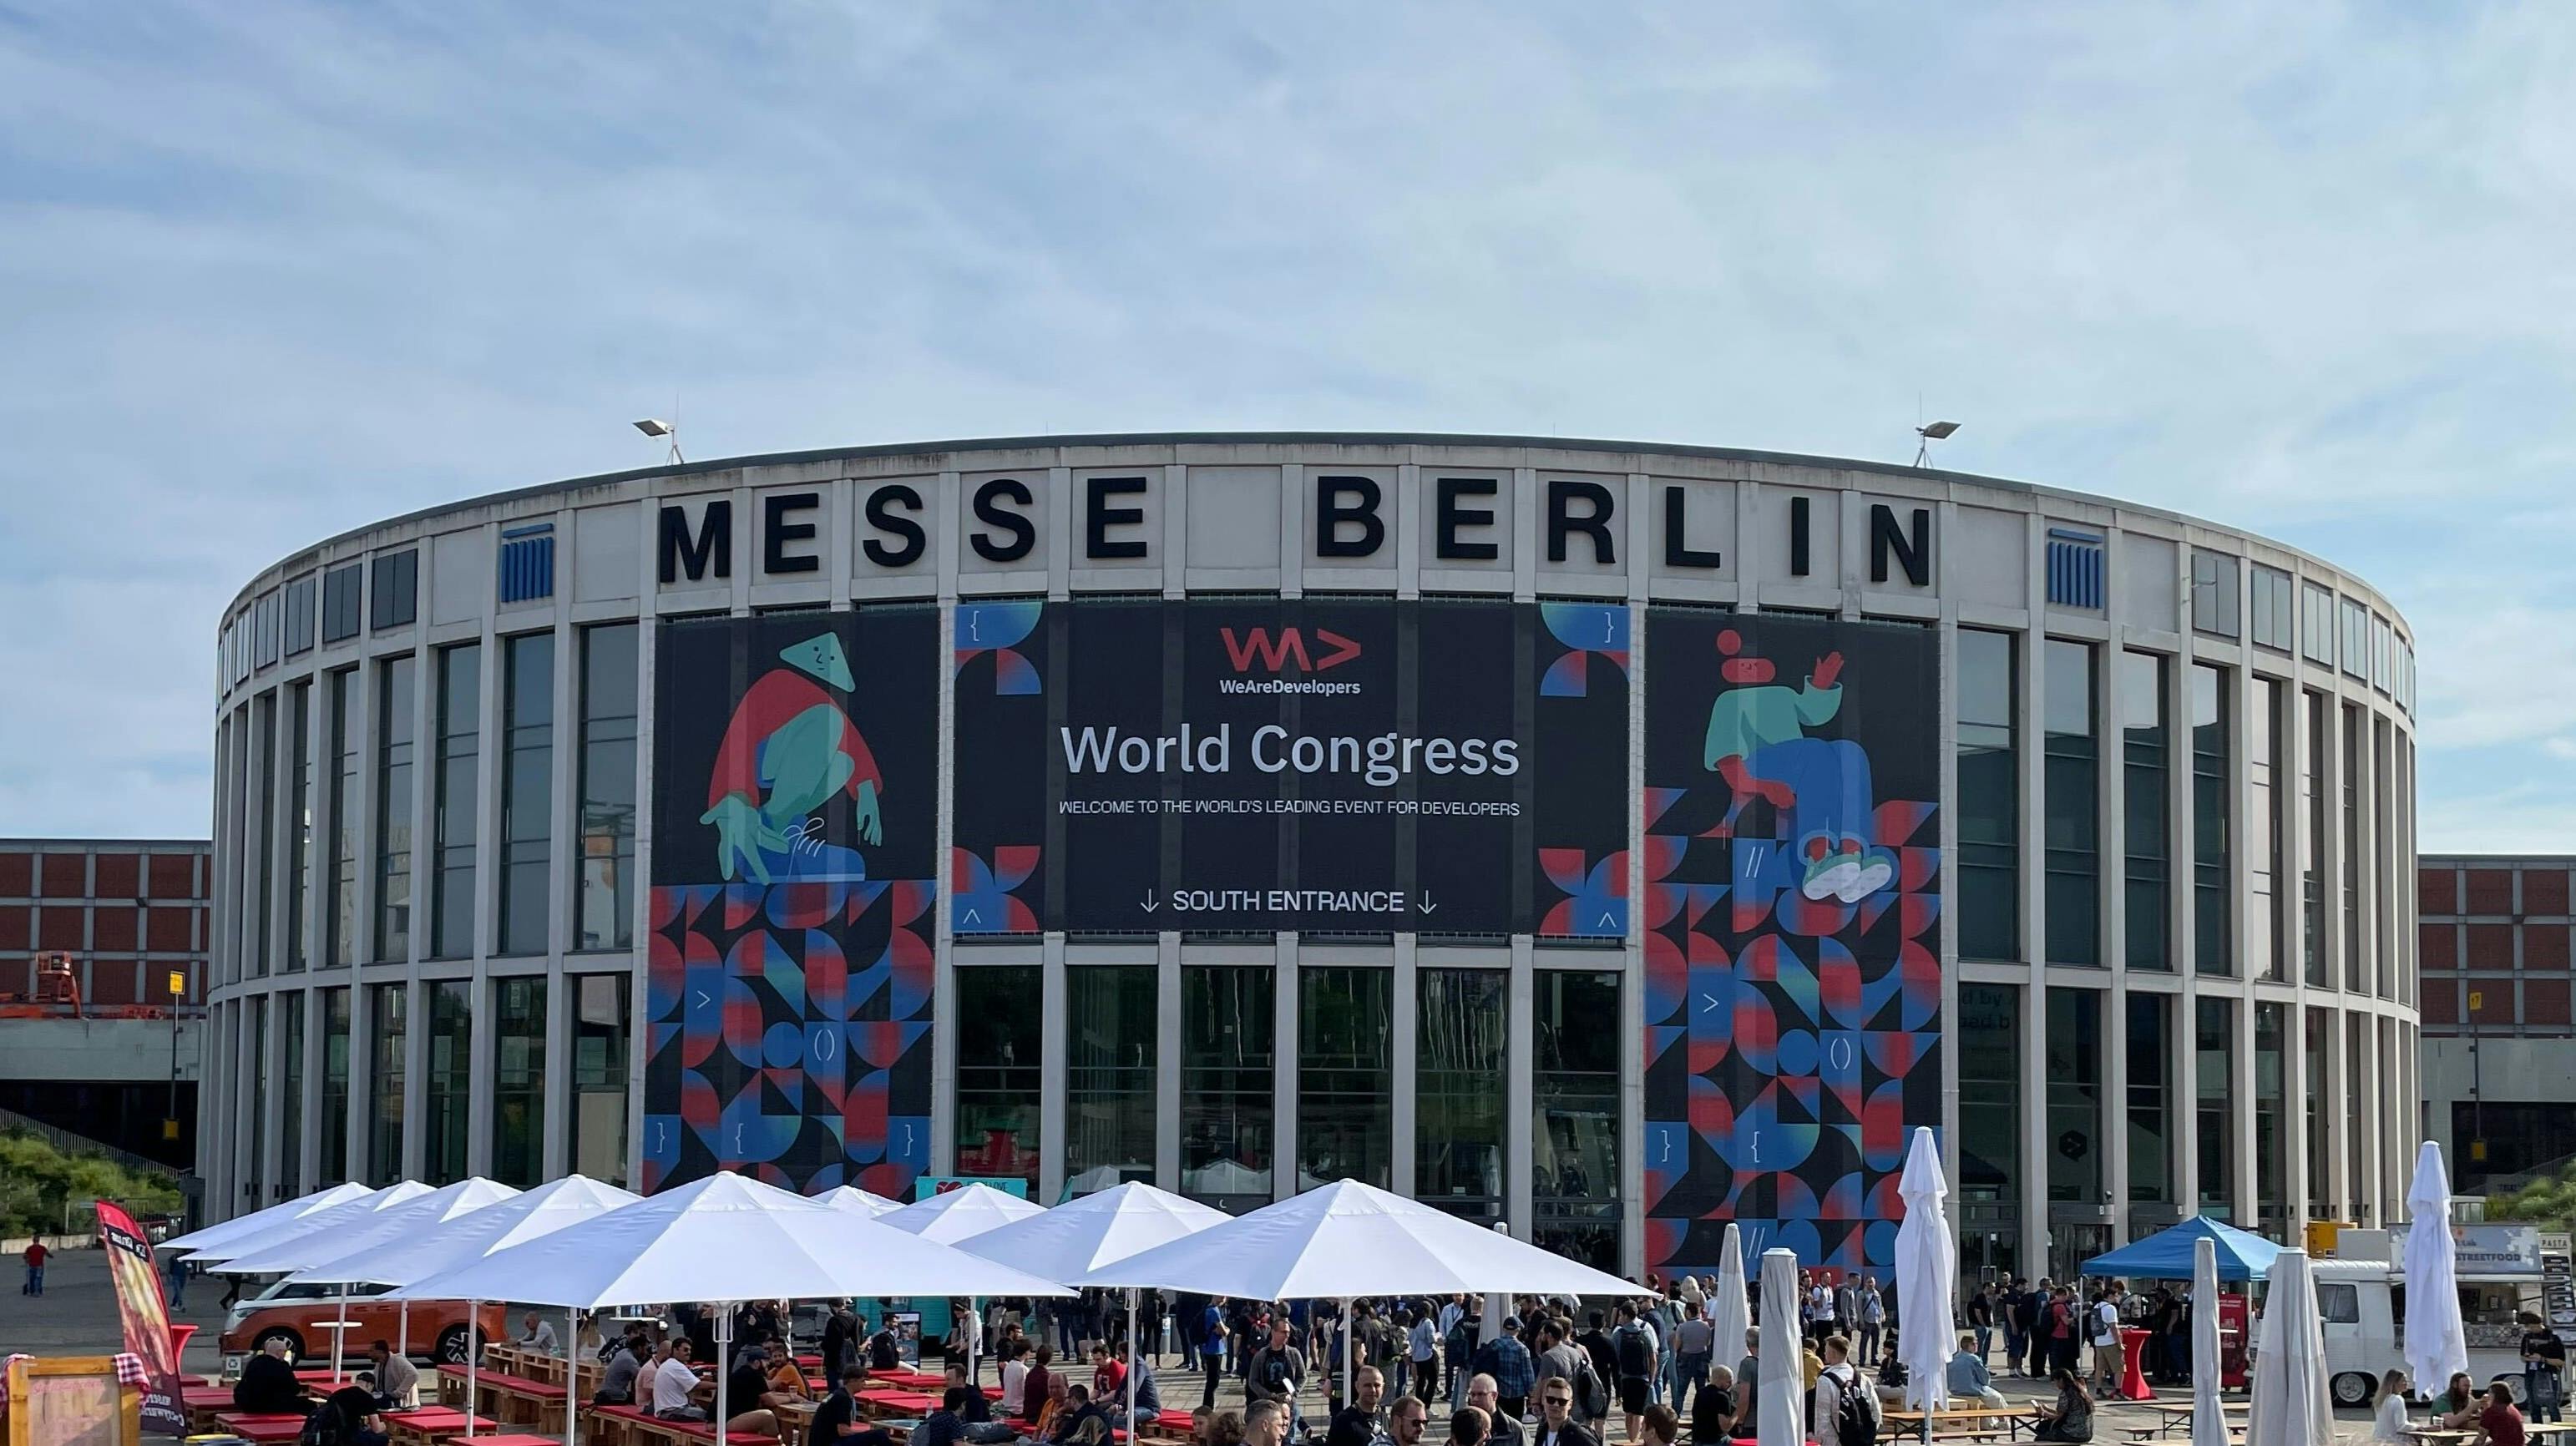 WeAreDevelopers Conference 2023 taking place at Exhibition hall Messe Berlin